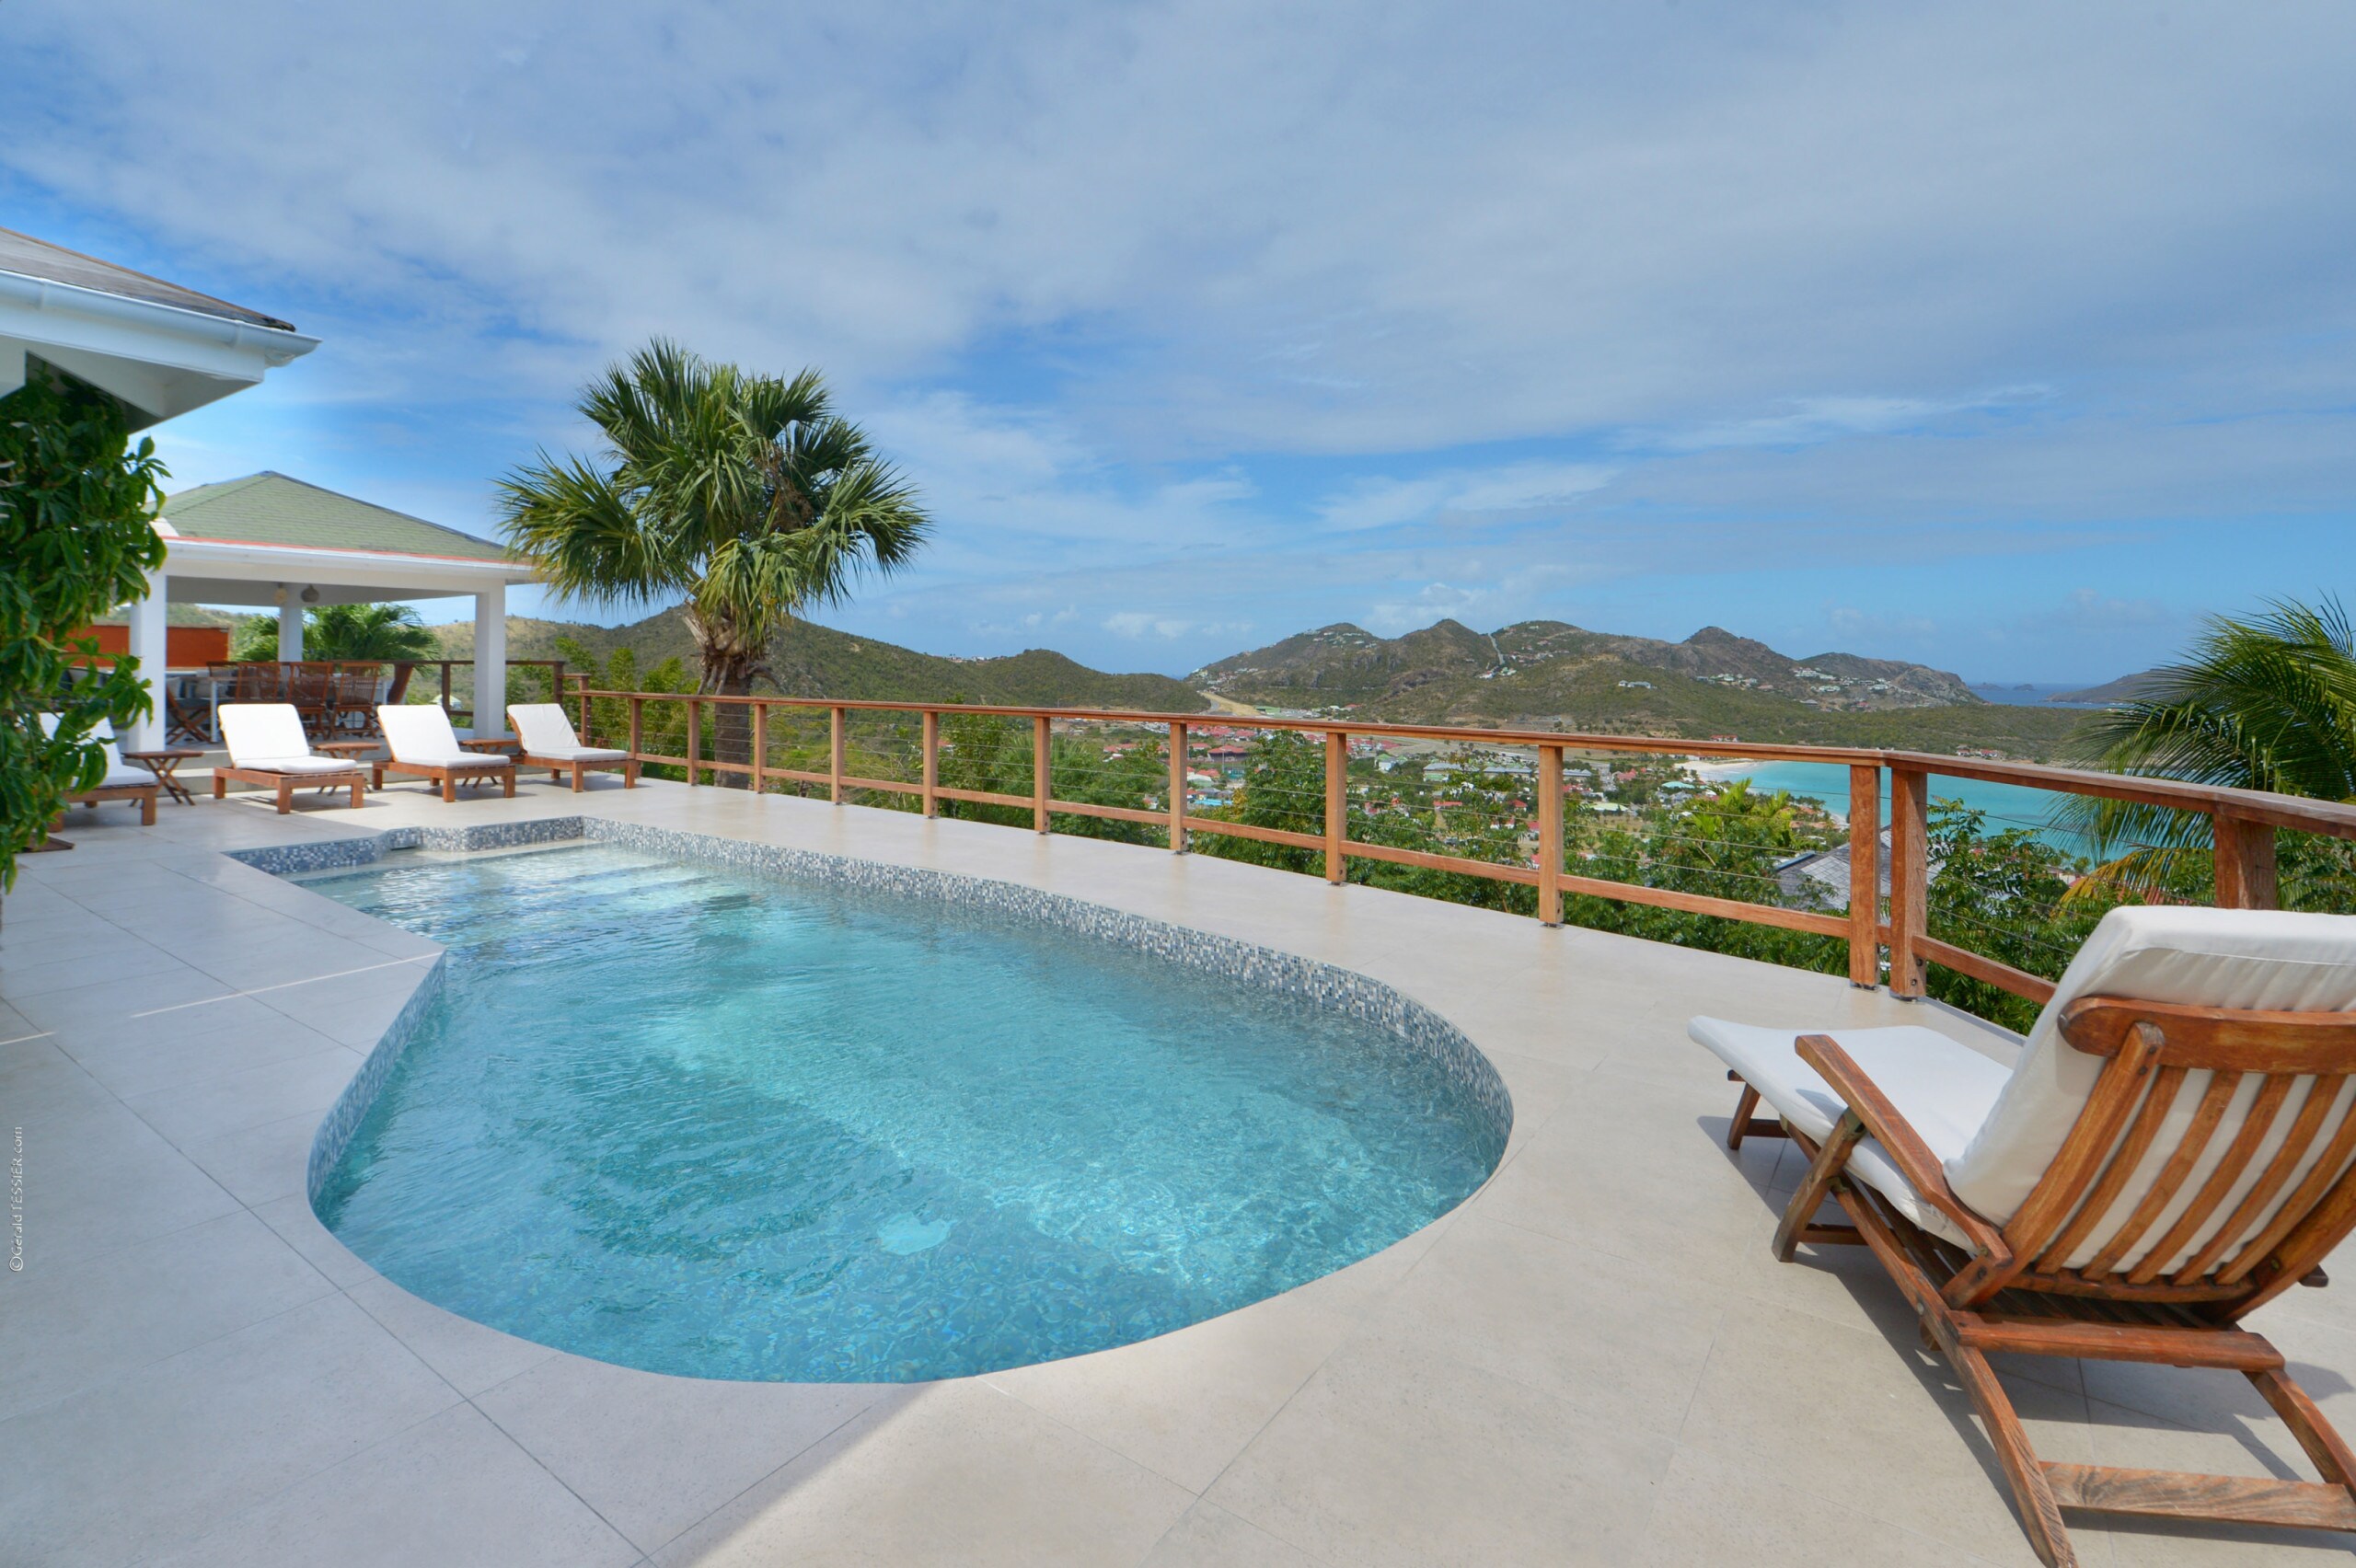 Beautiful pool, nice terrace with lounge area, deck chairs, and panoramic views over the bay.&nbsp;